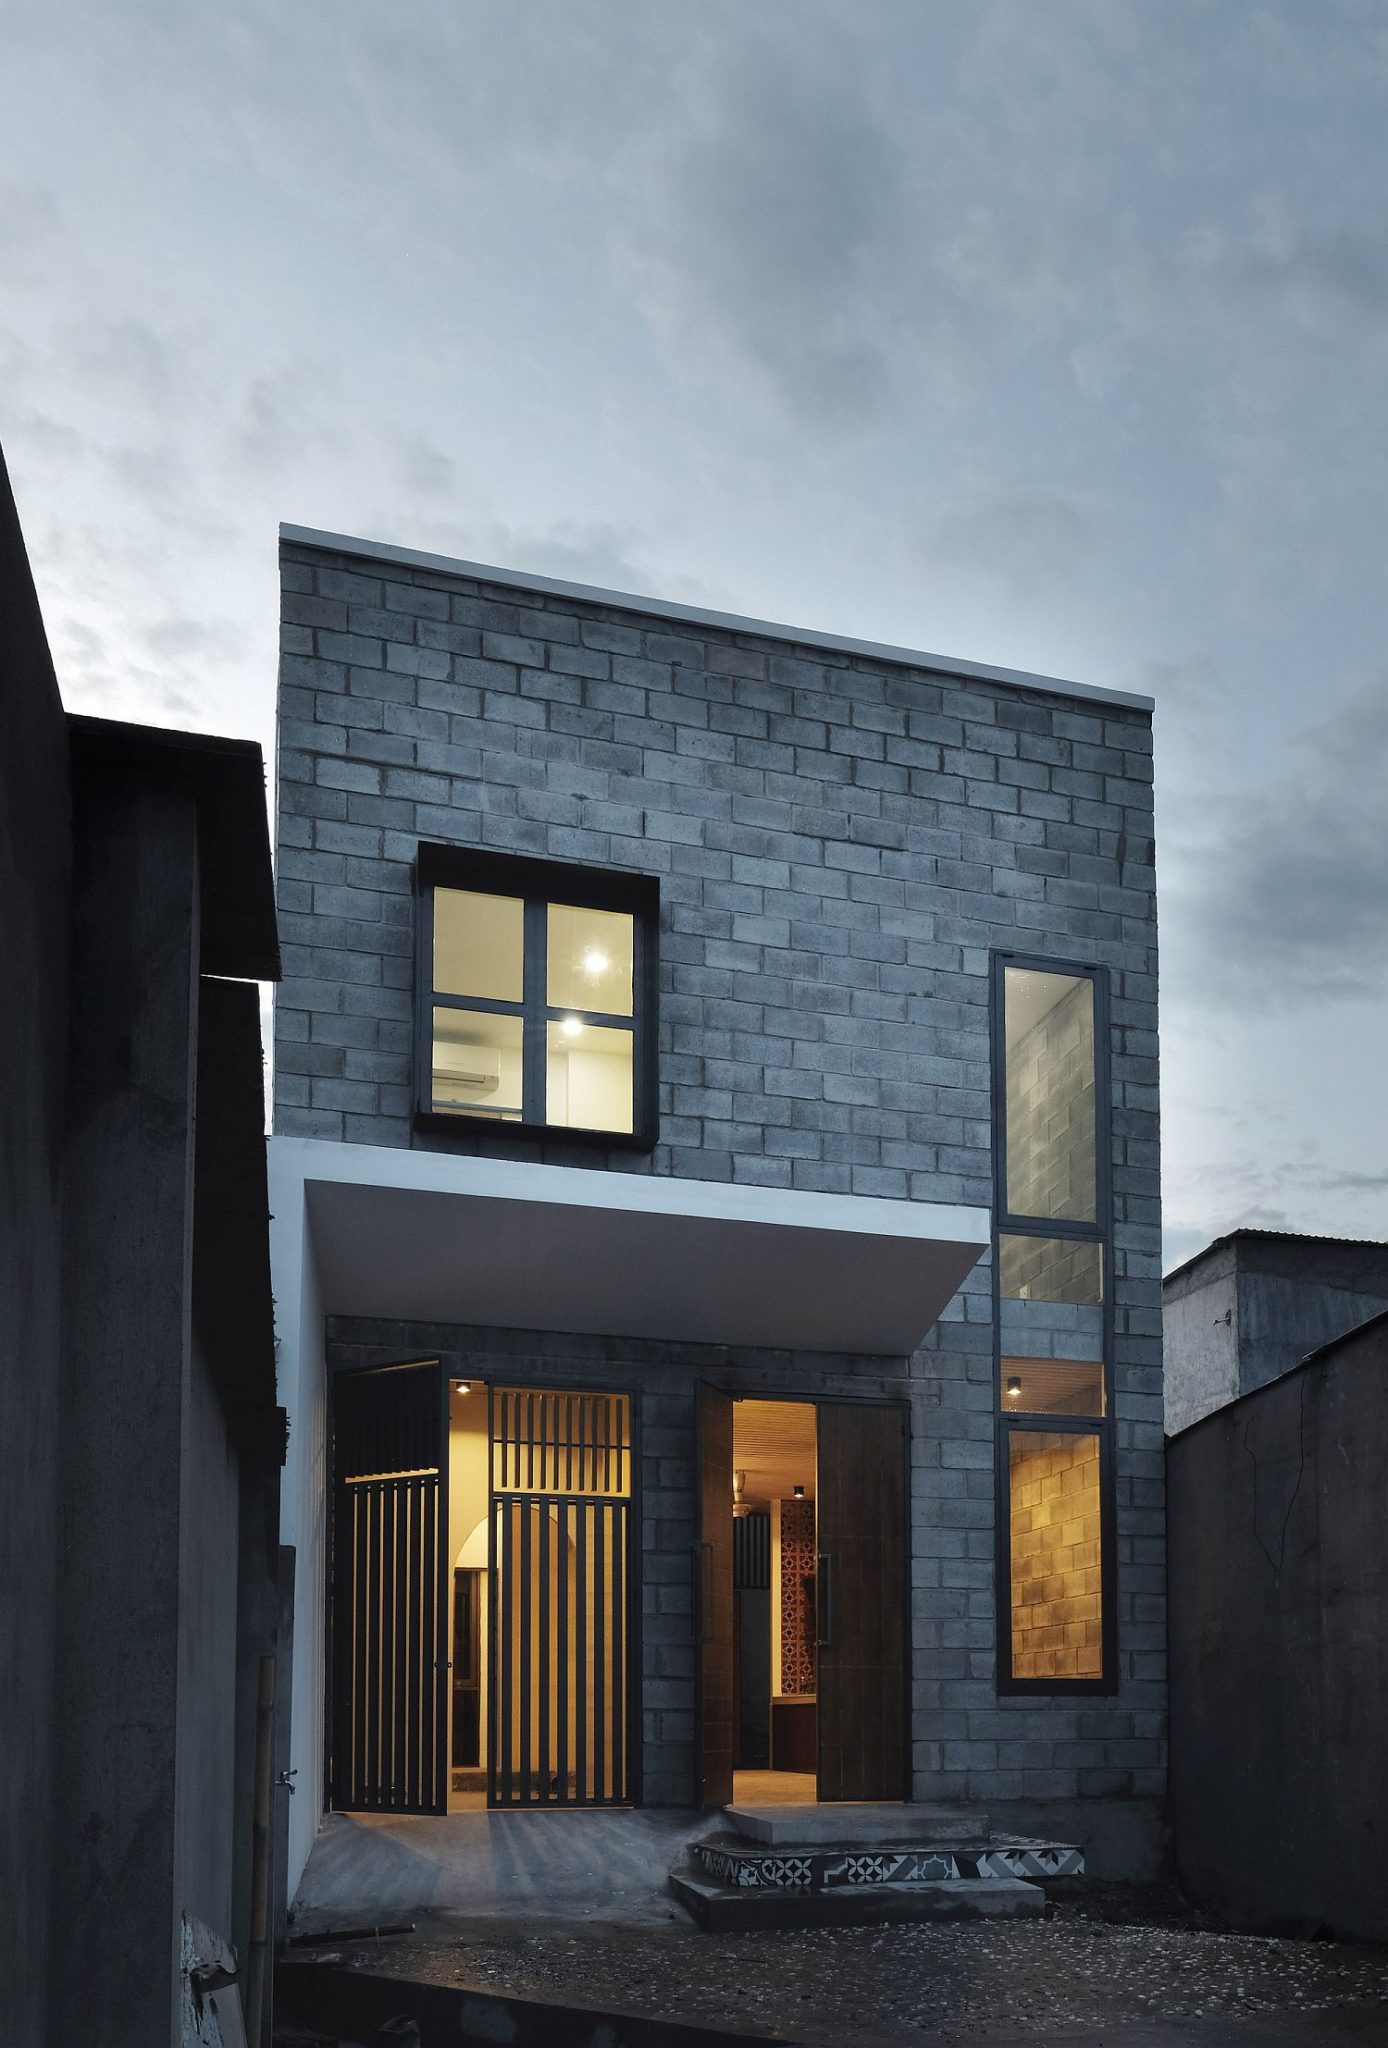 Concrete blocks and glass shape the exterior of the budget-friendly home in Vietnam